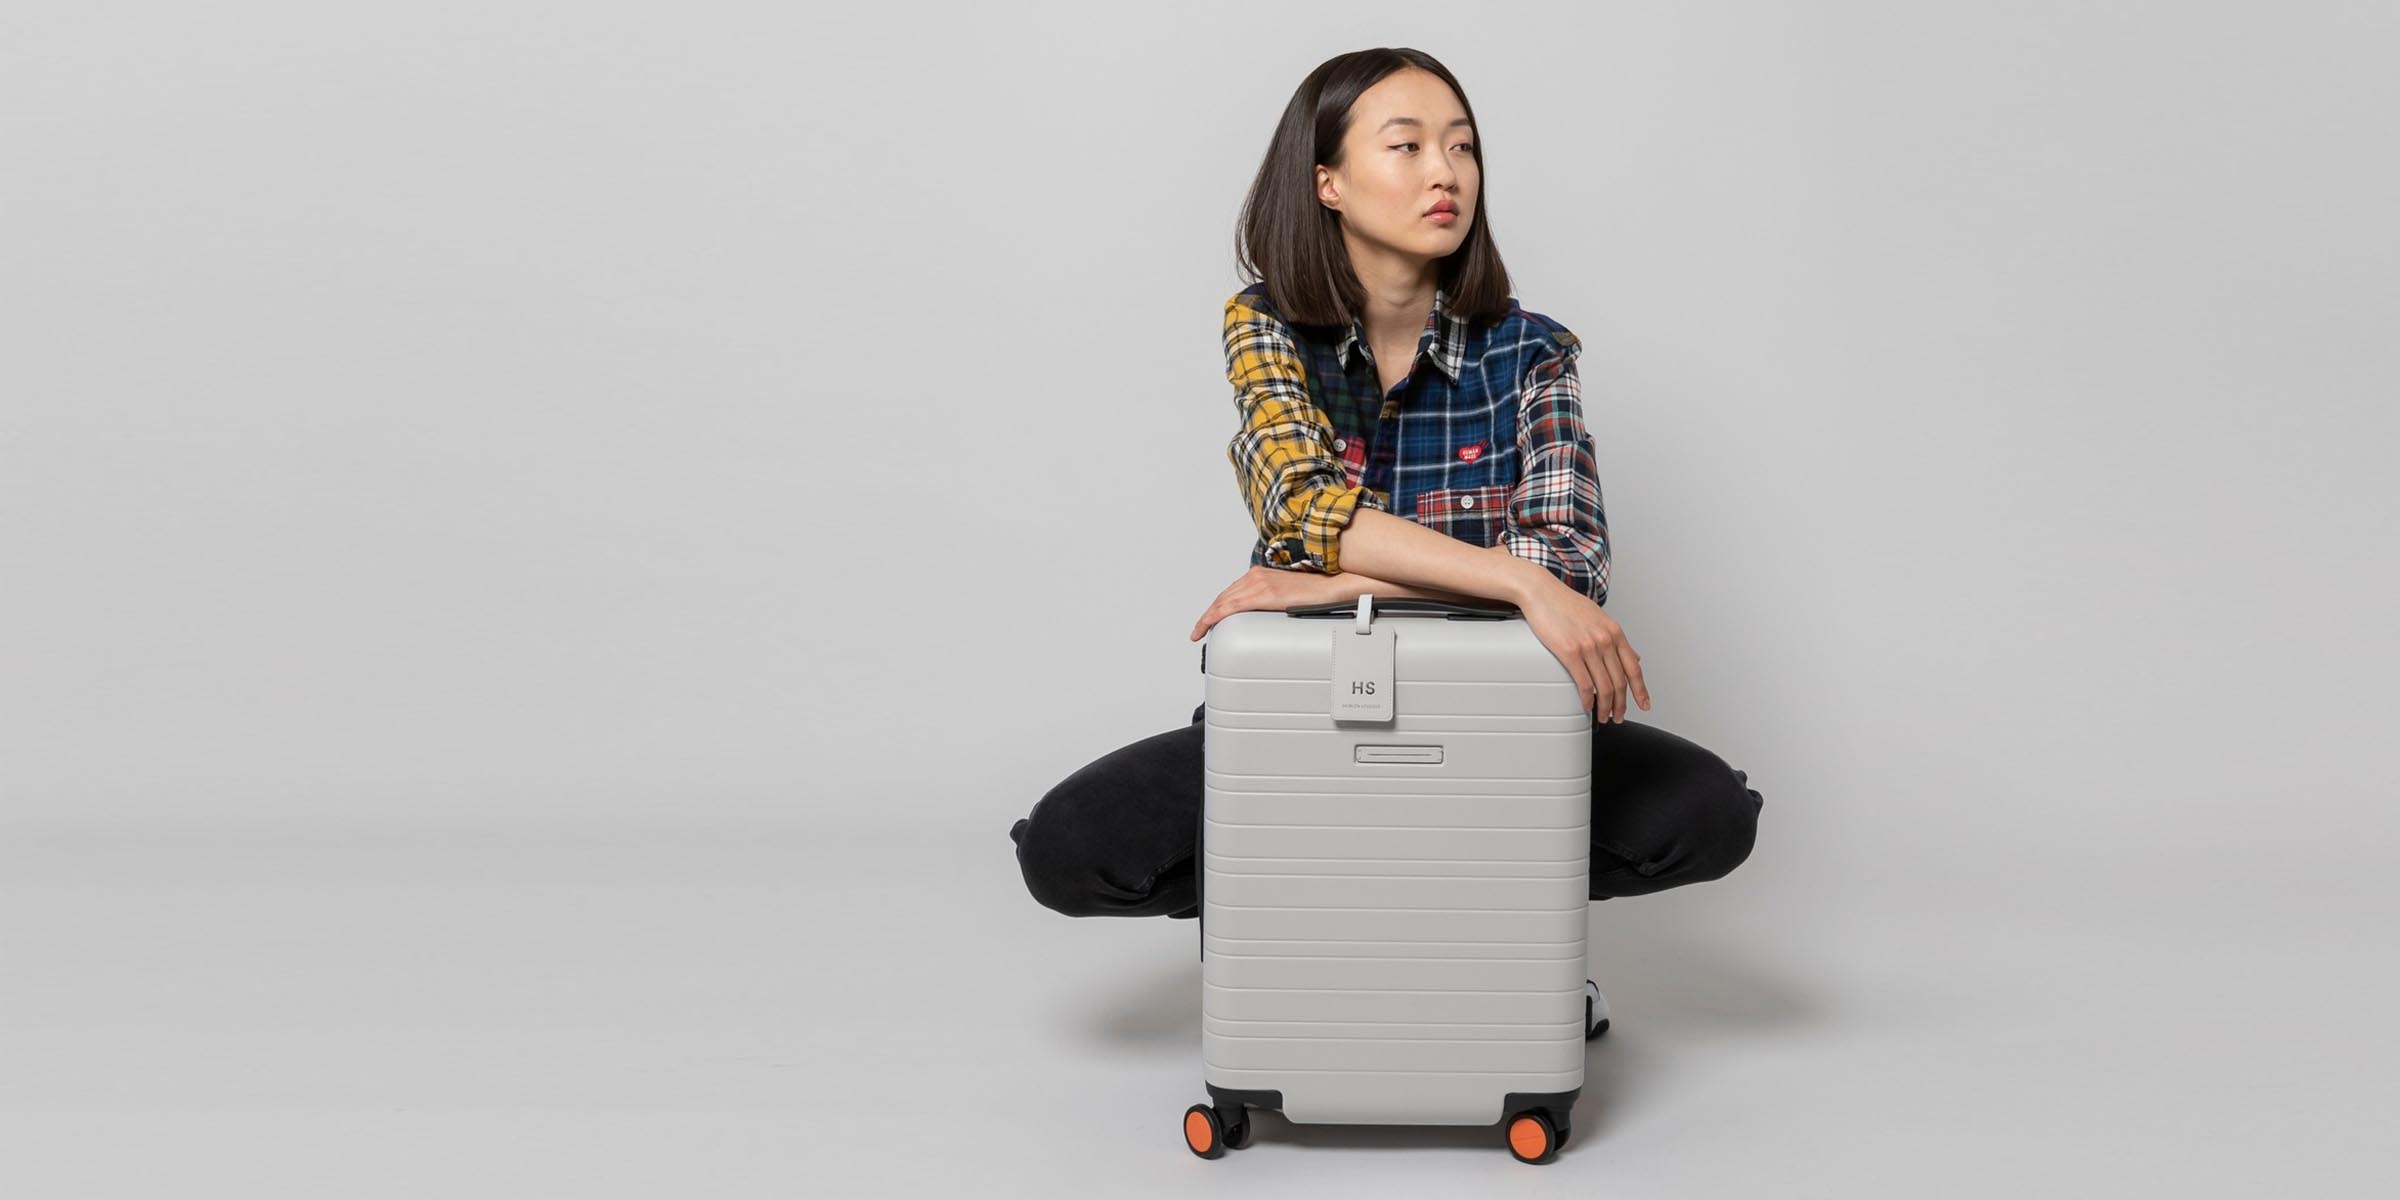 Away Luggage Review: Instagram's Favorite Bag • Travel Worth Telling